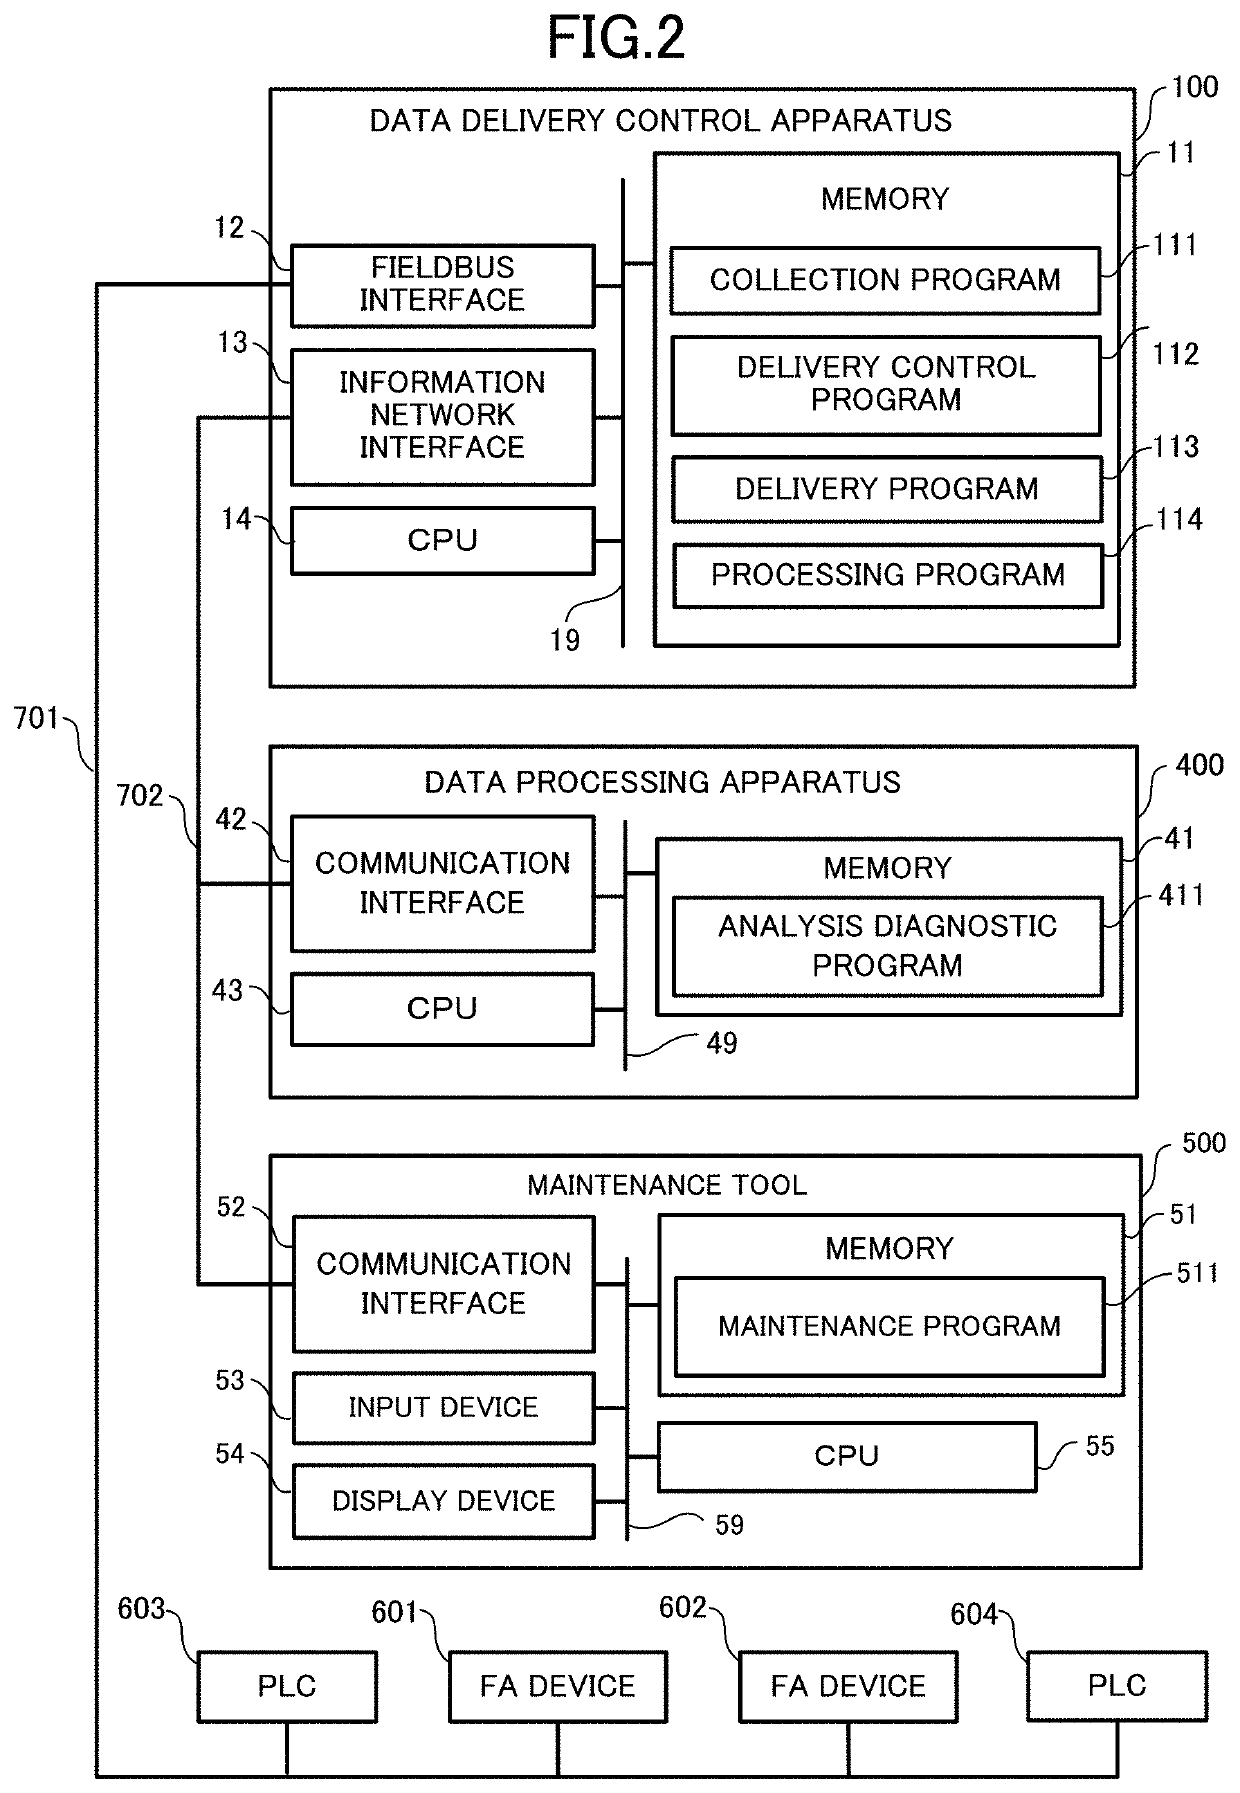 Data delivery control apparatus, method, and program